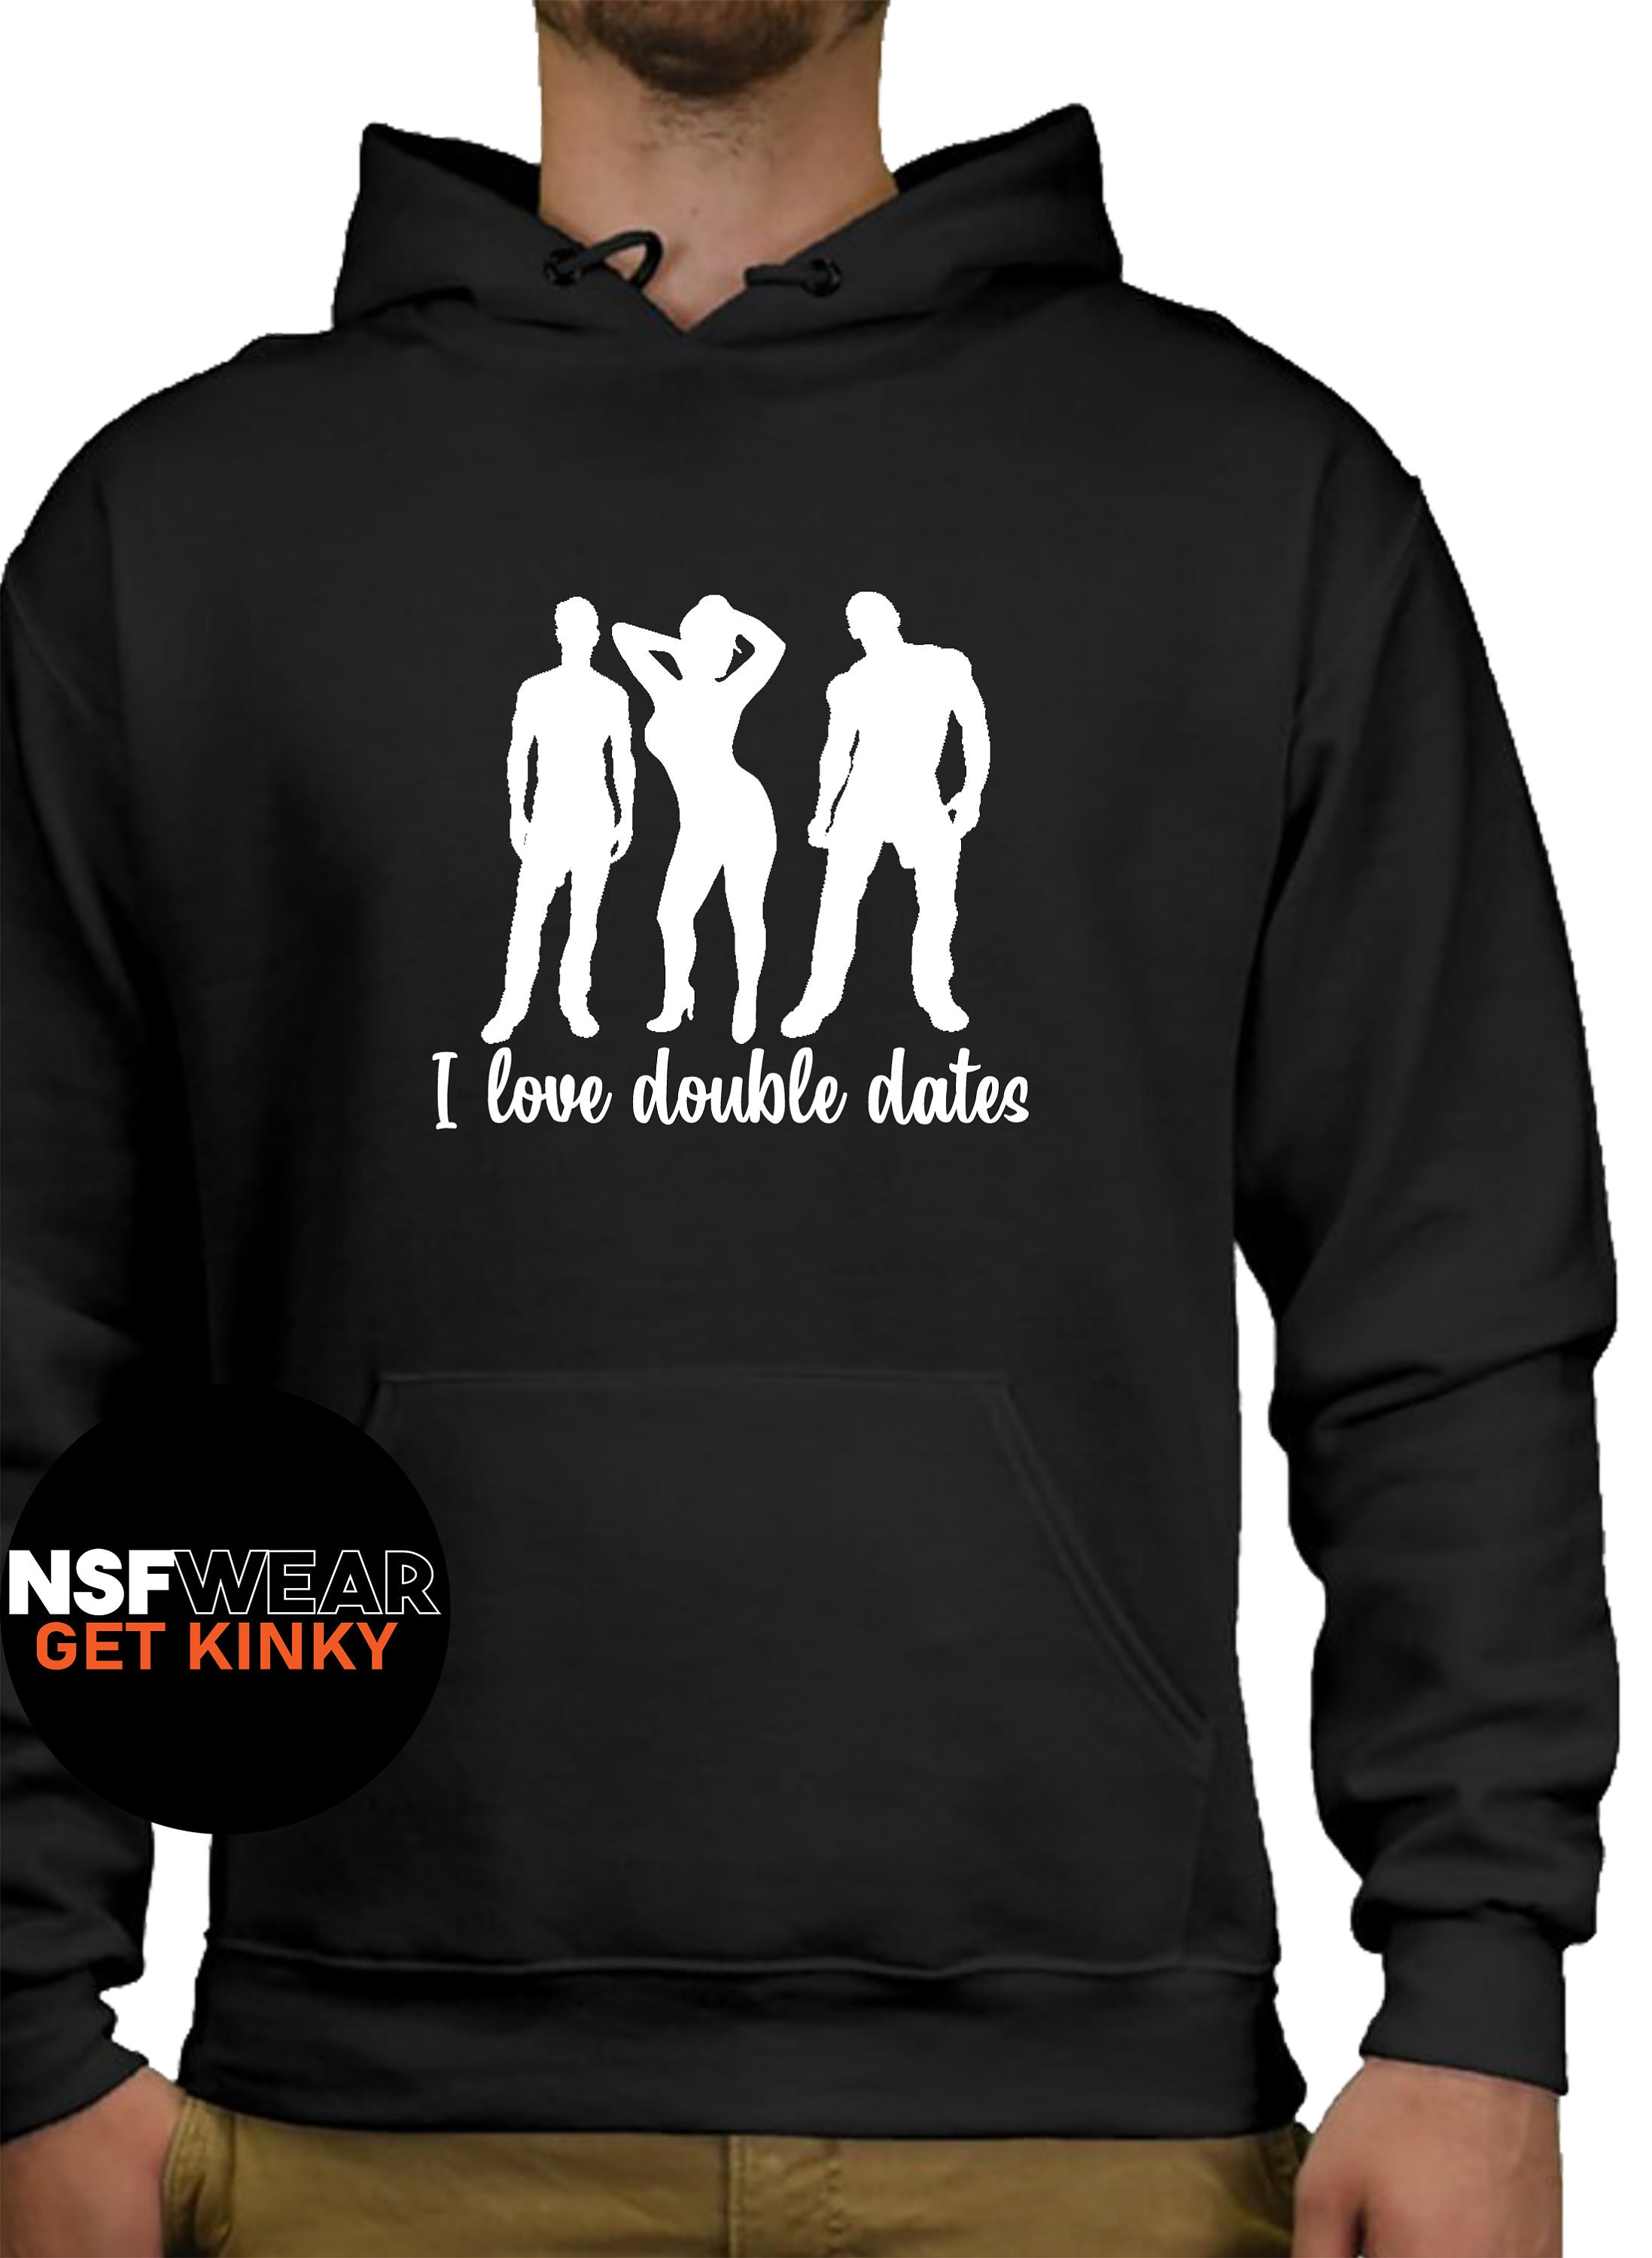 I Love Date Night Hoodie Swinger Hotwife Qos Group picture